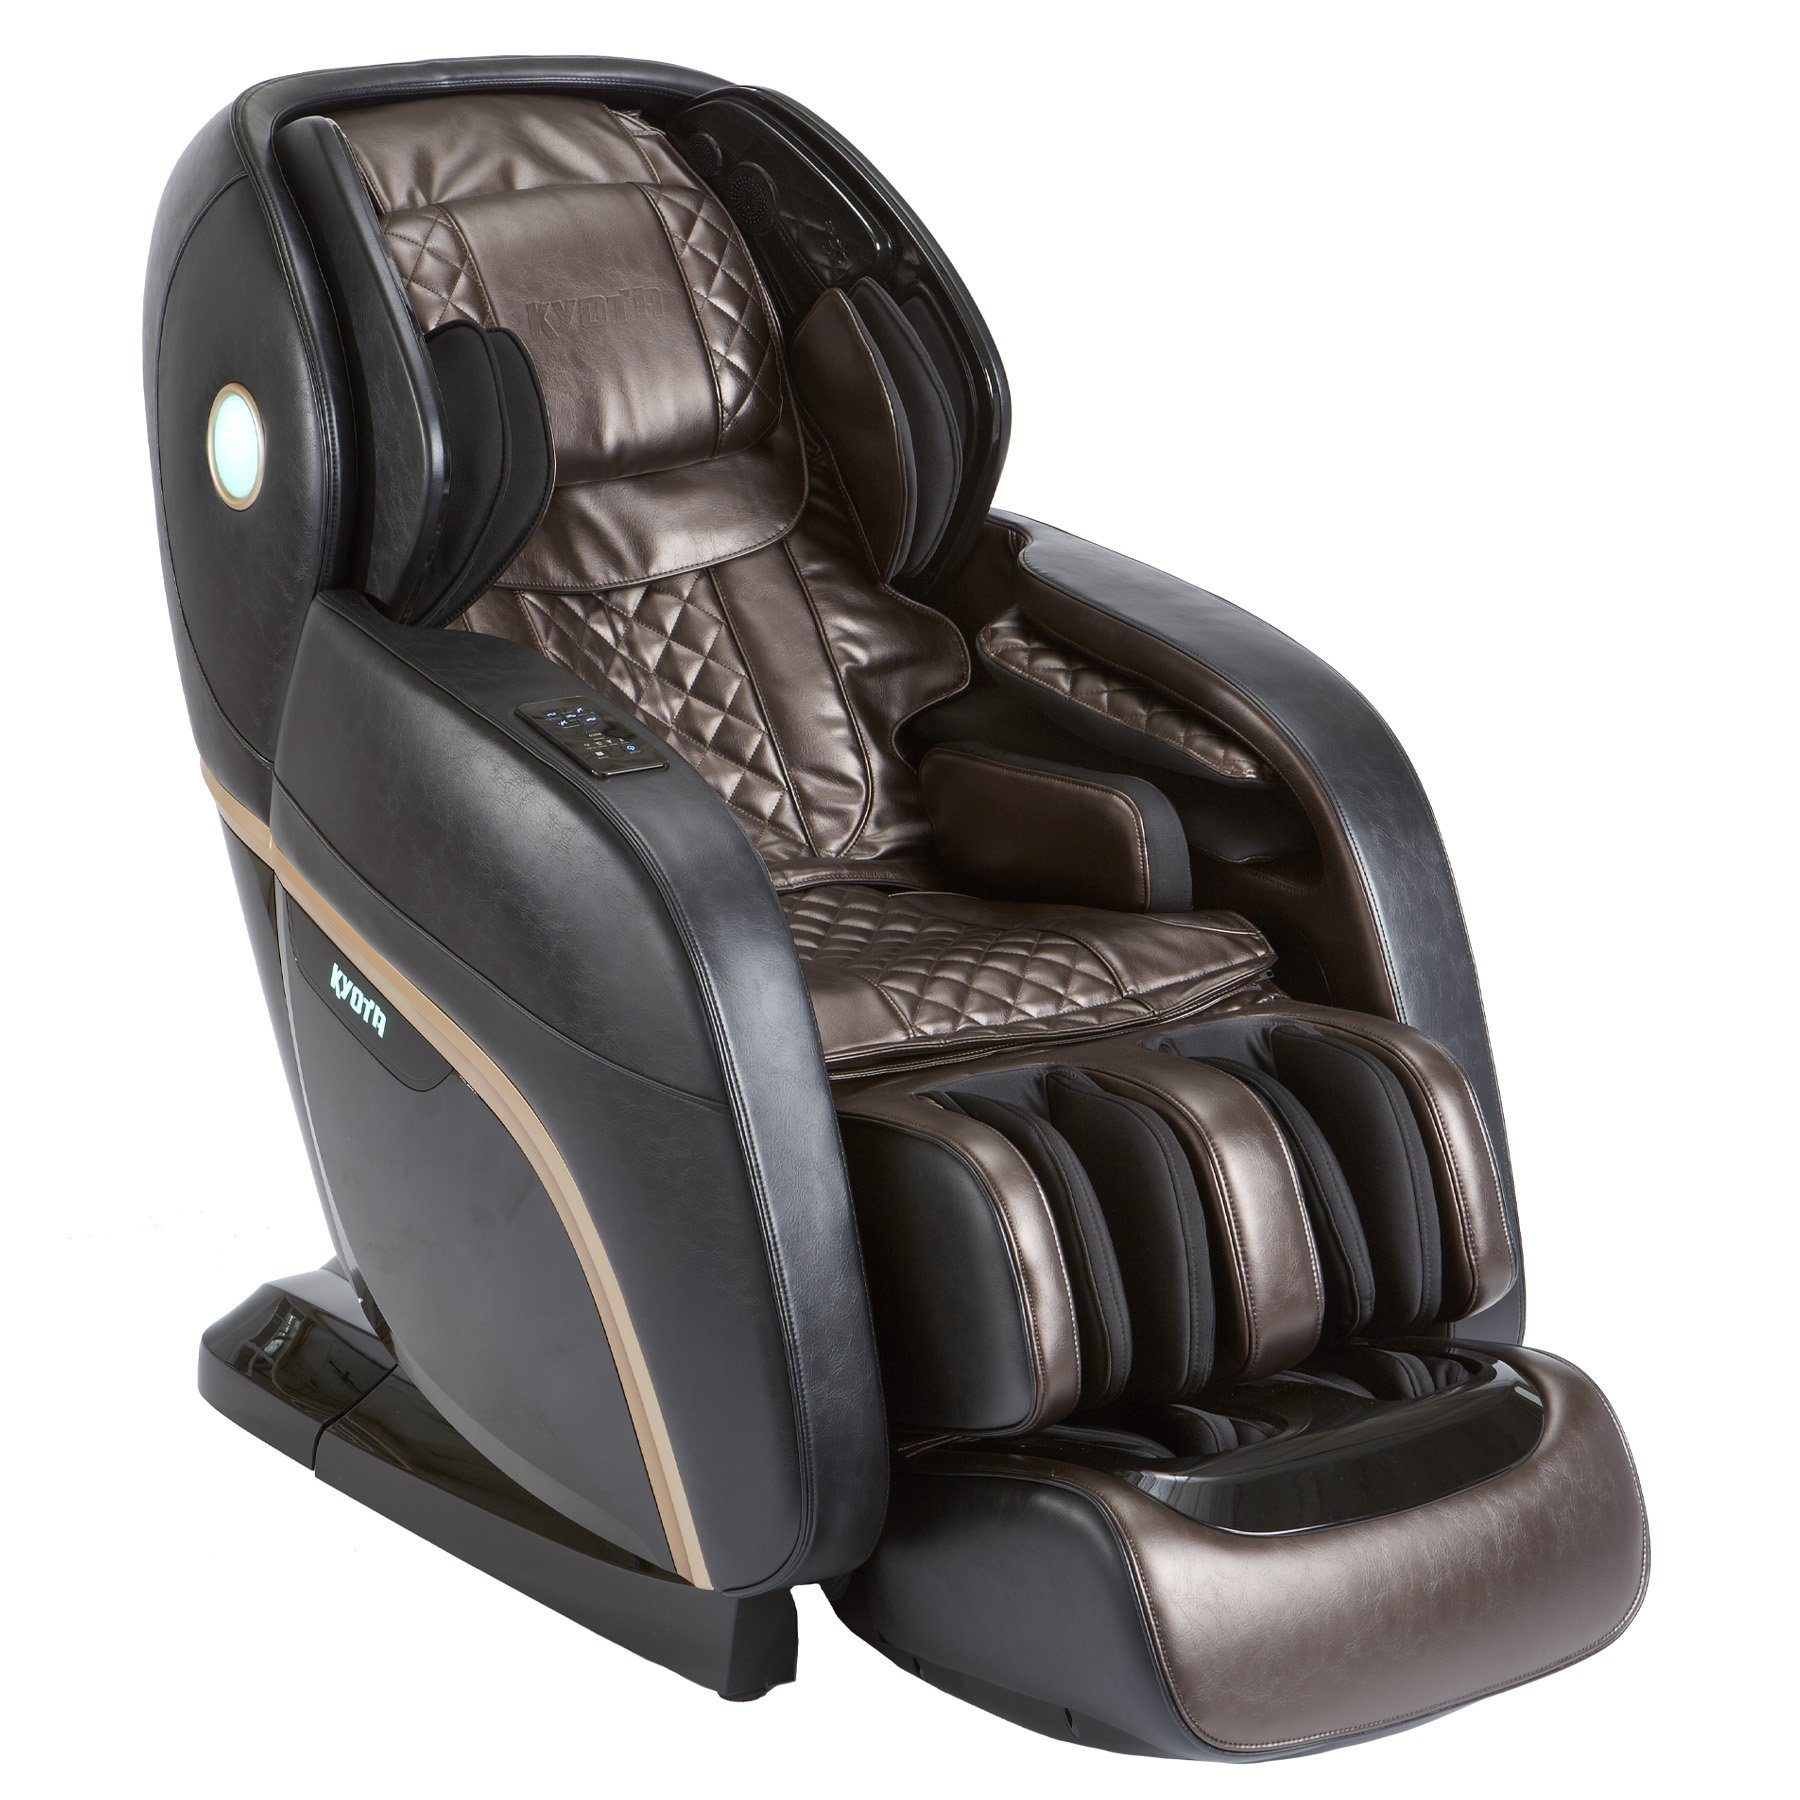 Buyers Guide The 11 Best Massage Chairs For 2021